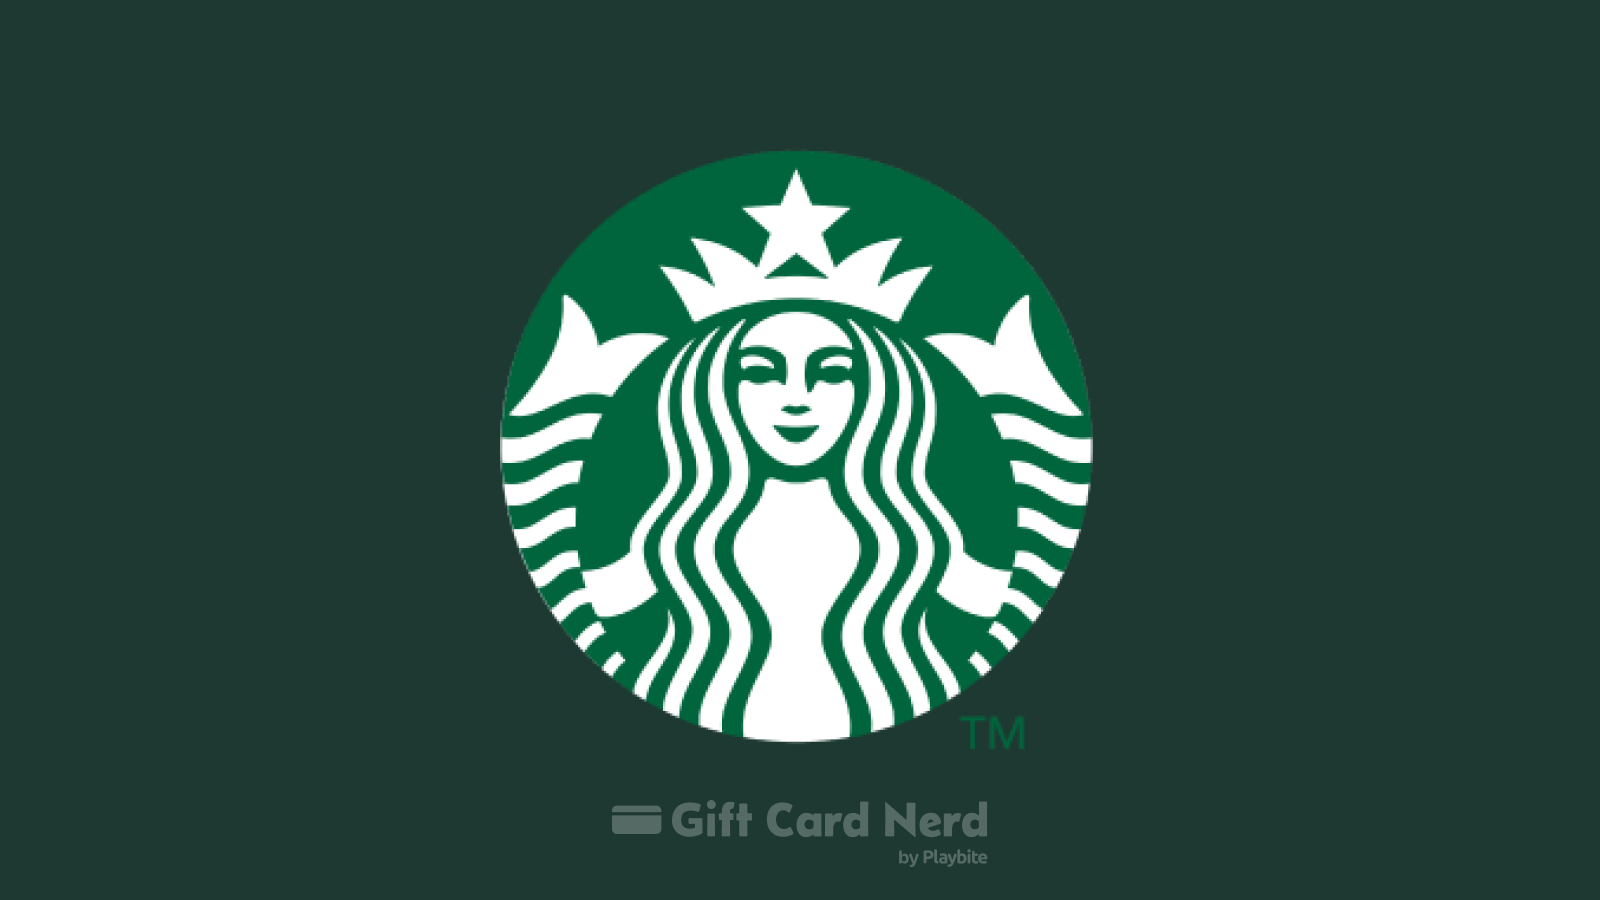 Can I Use a Starbucks Gift Card on Google Play Store?